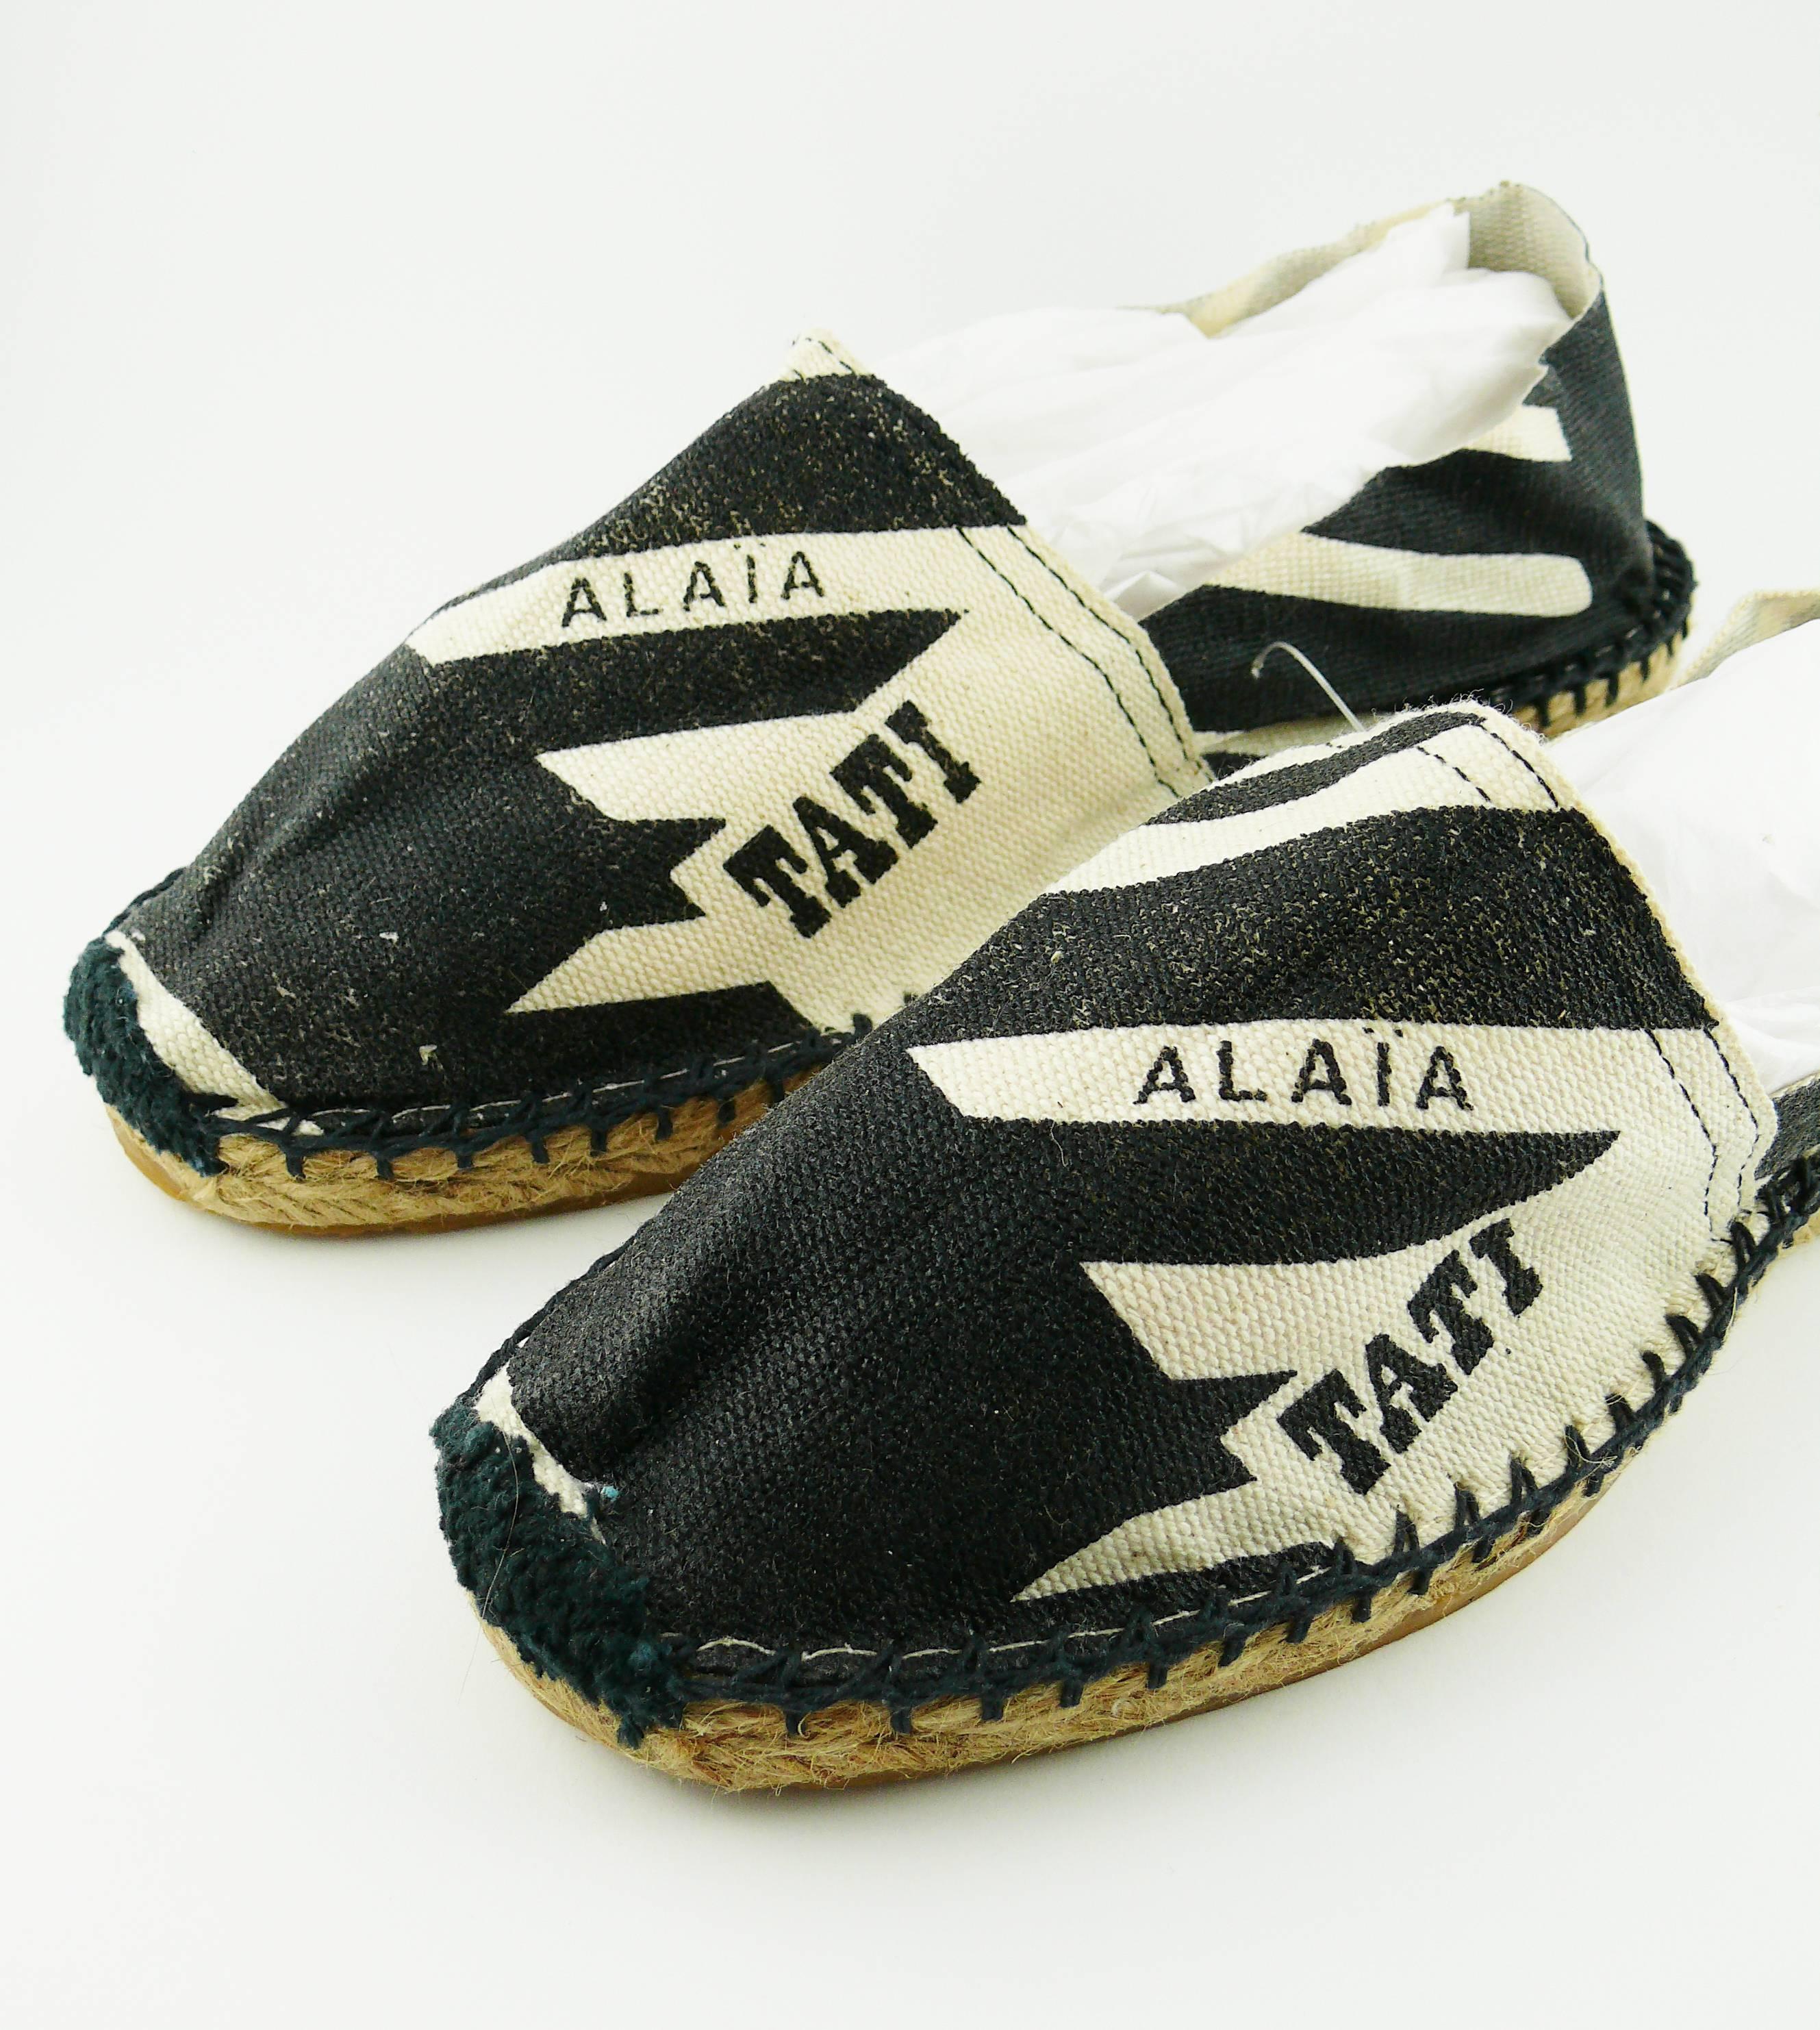 ALAIA for TATI early 1990s iconic navy blue and off-white hound's tooth canvas espadrilles. 

Unworn condition (including flaws). 

A very rare and collectable find !

Fashion designer AZZEDINE ALAIA worked for TATI in the early 90's and